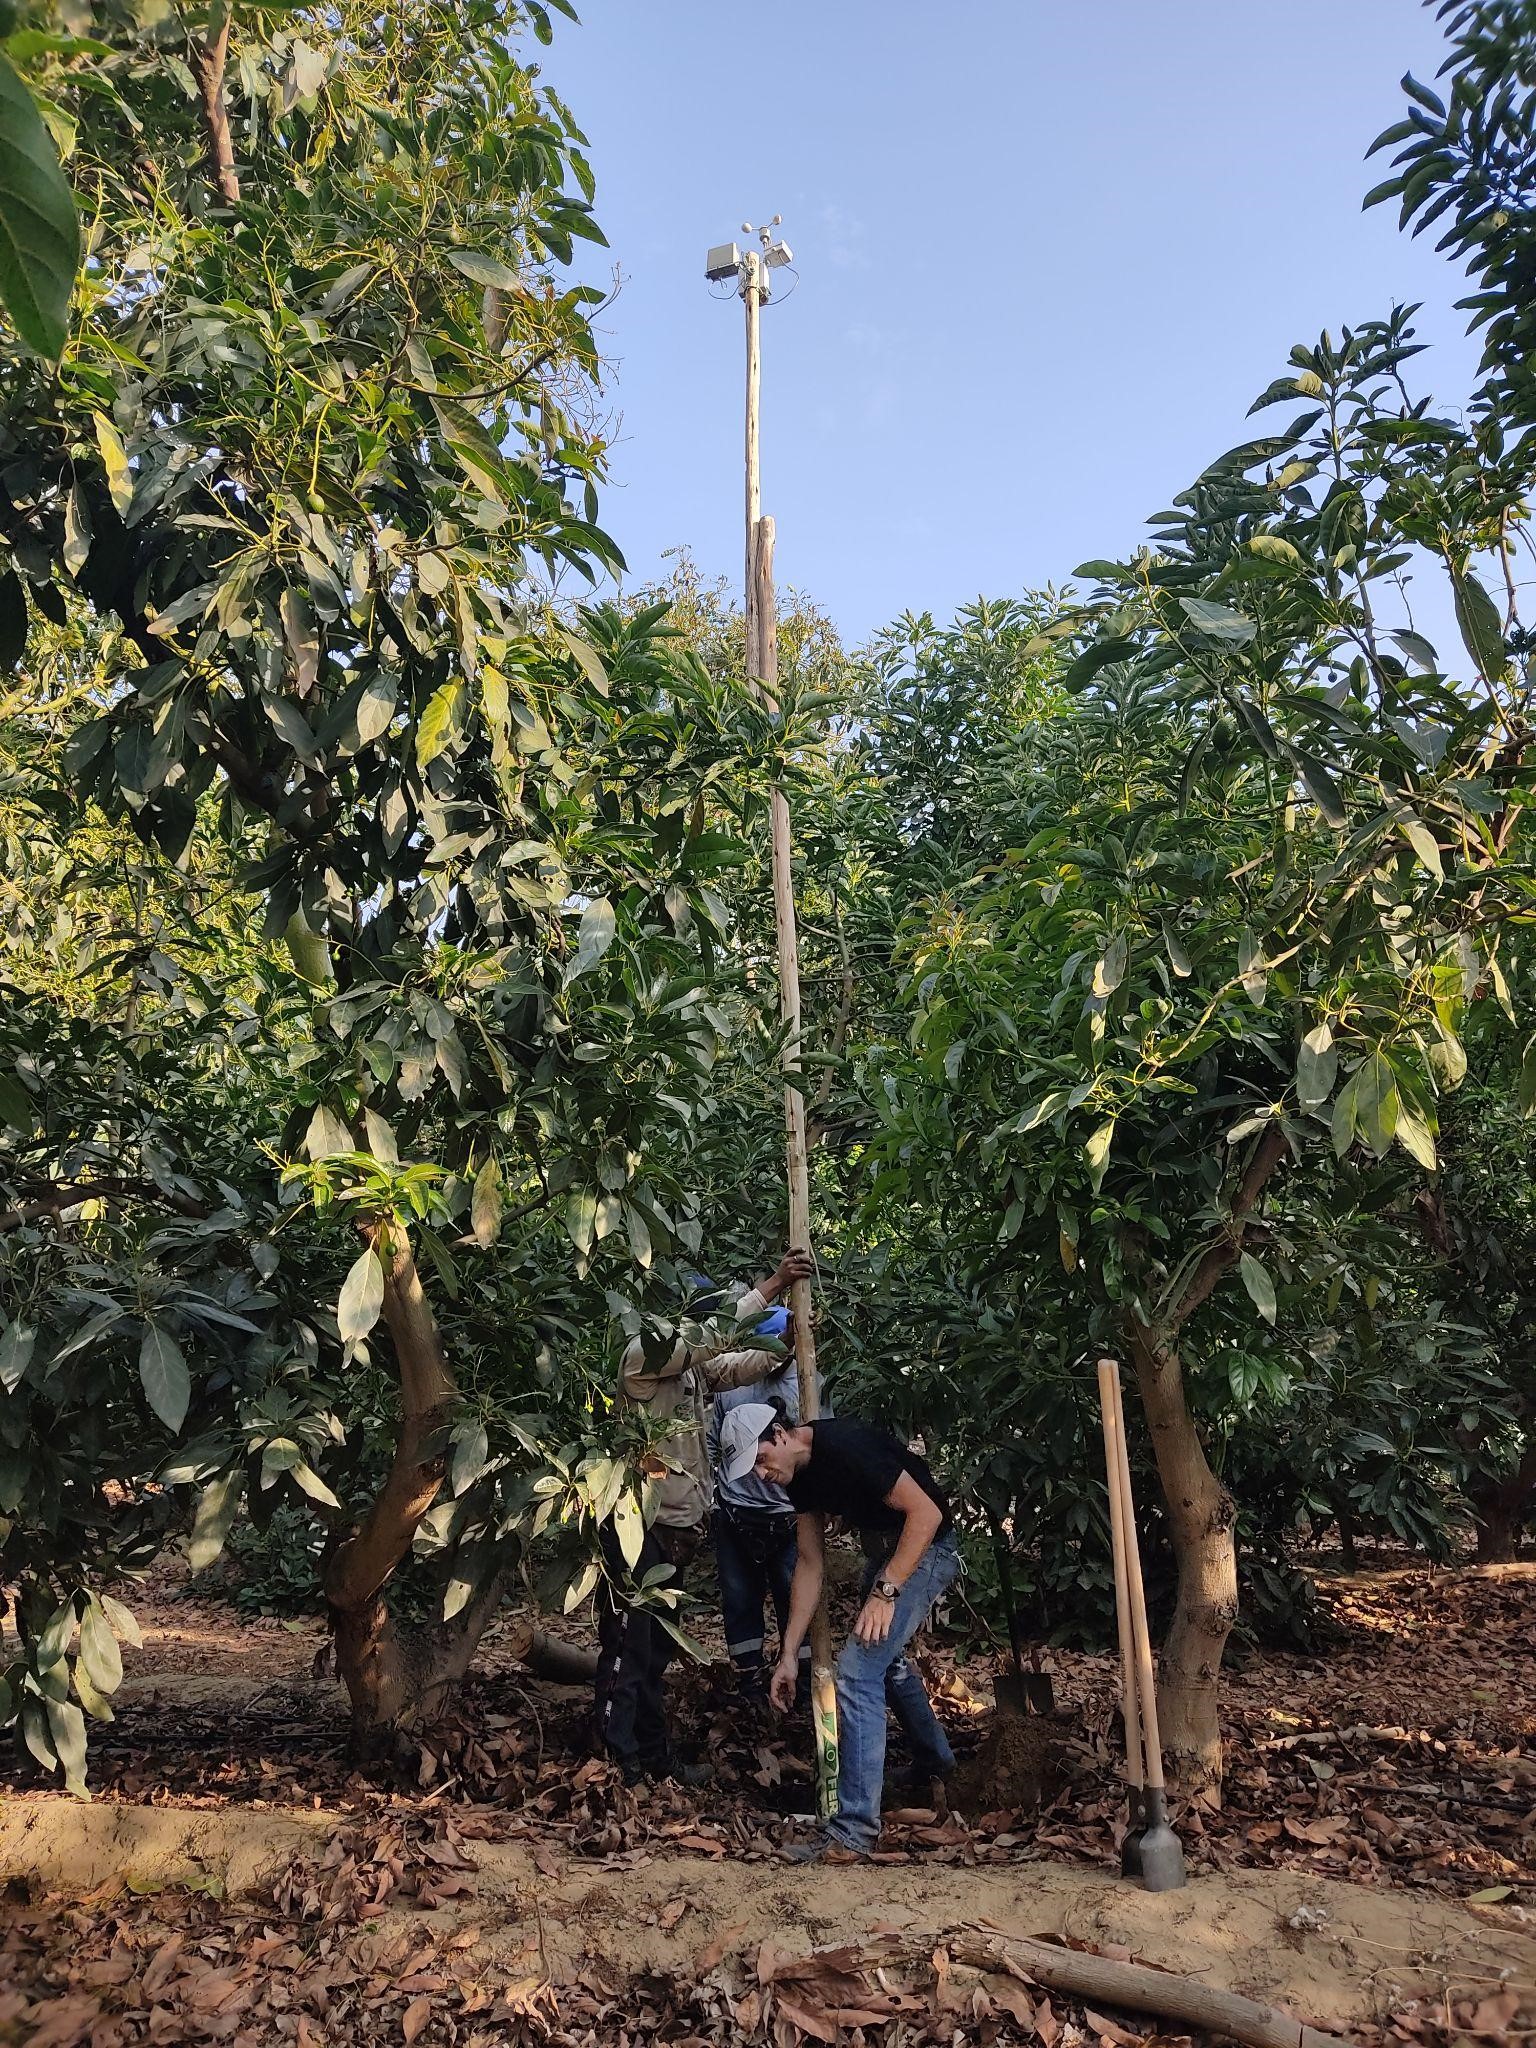 On the ground: One of WiForCrop’s local weather stations in the Peruvian avocado crop fields. Credit: WeatherForce